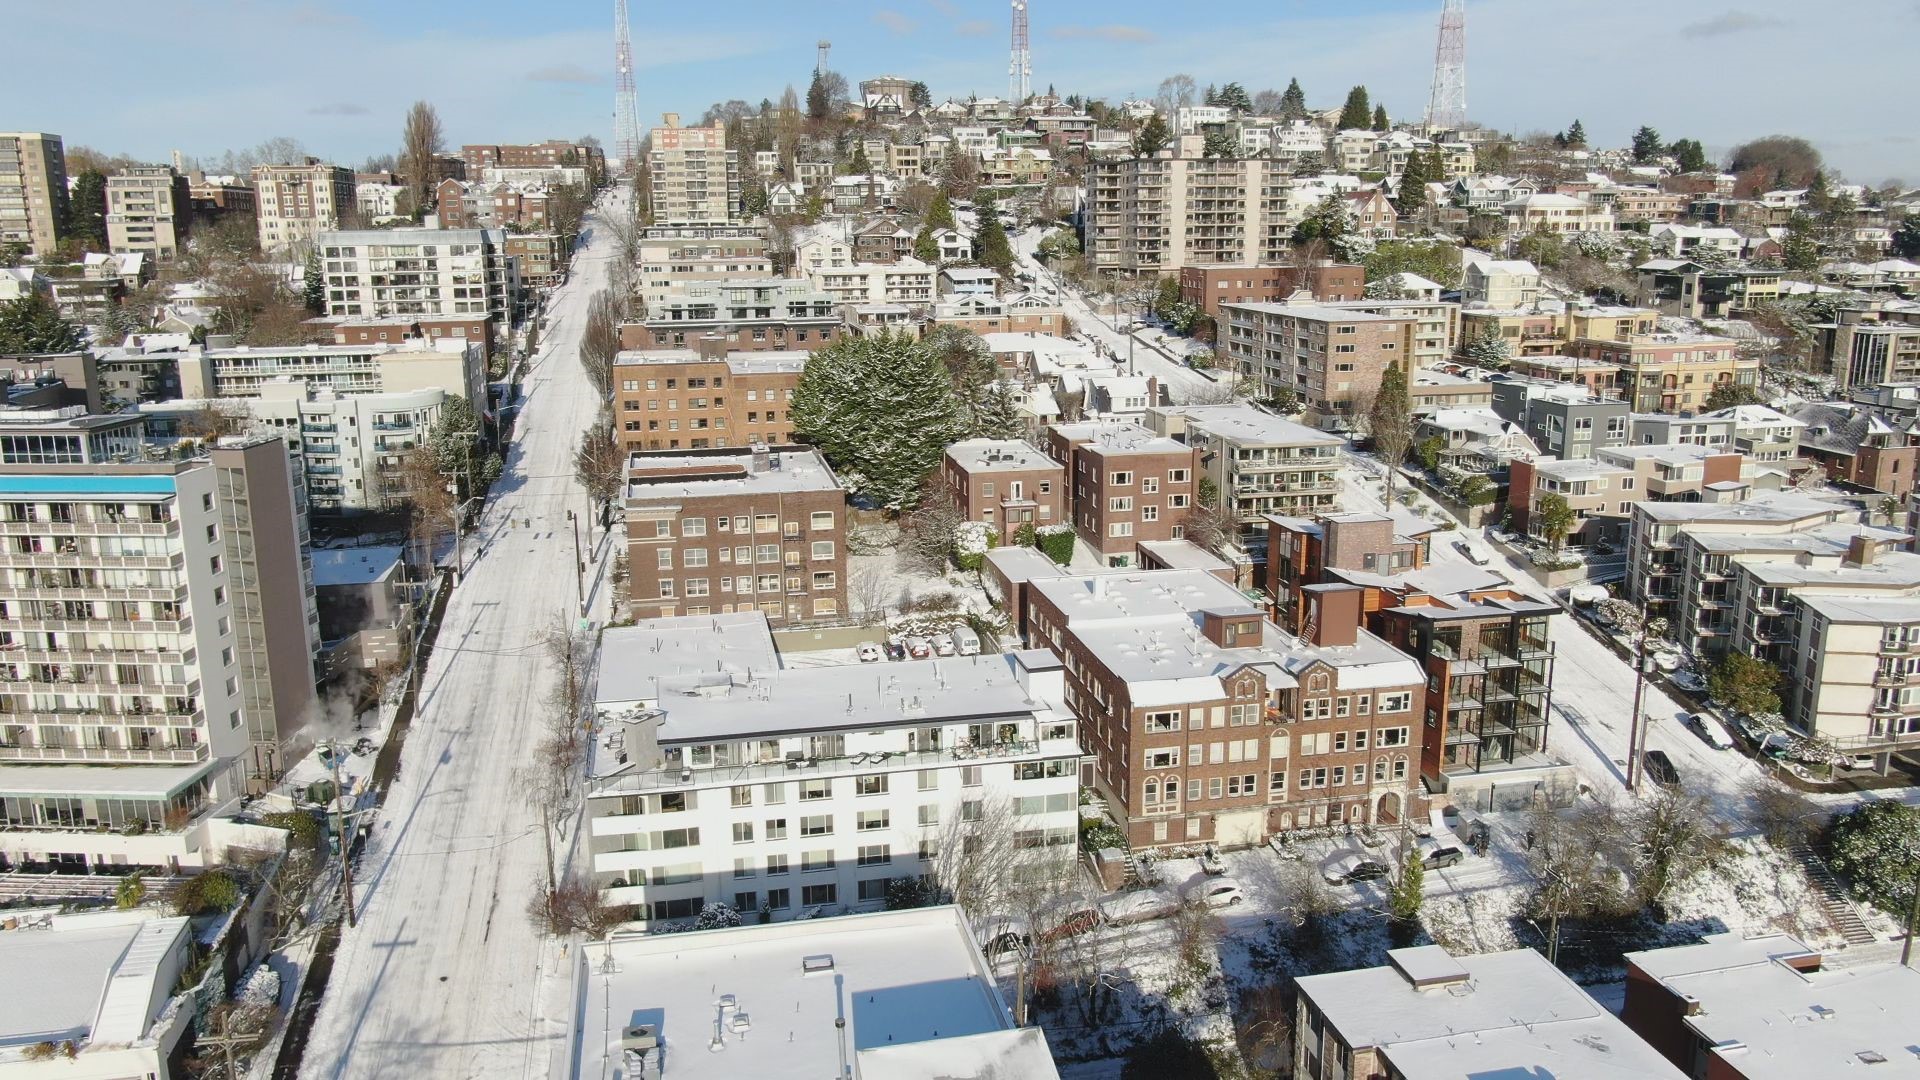 Snow blanketed Seattle's Queen Anne neighborhood on Dec. 27, 2021. More than 3 inches of snow fell at Sea-Tac Airport on Dec. 26.